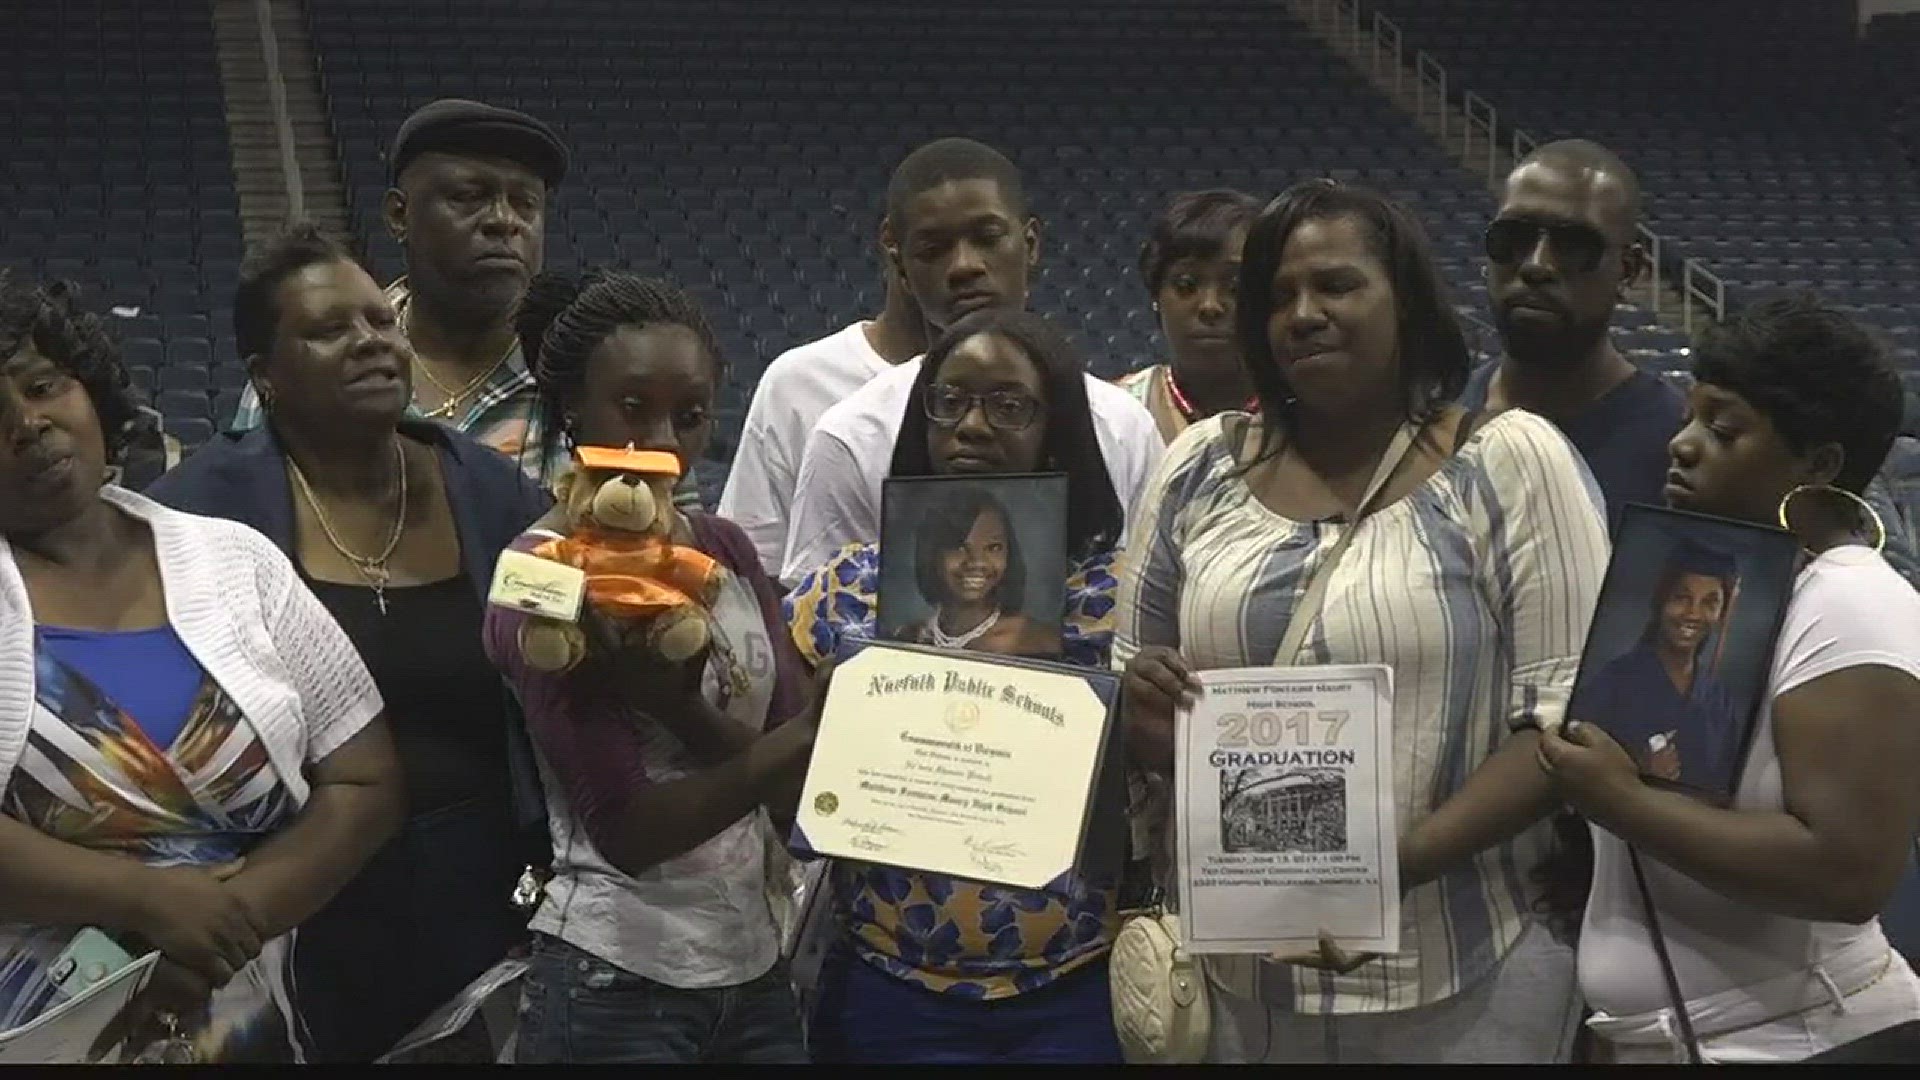 Police say another teenager shot and killed Nateria Powell nearly 3 weeks ago, and Tuesday her high school honored the young woman's memory.